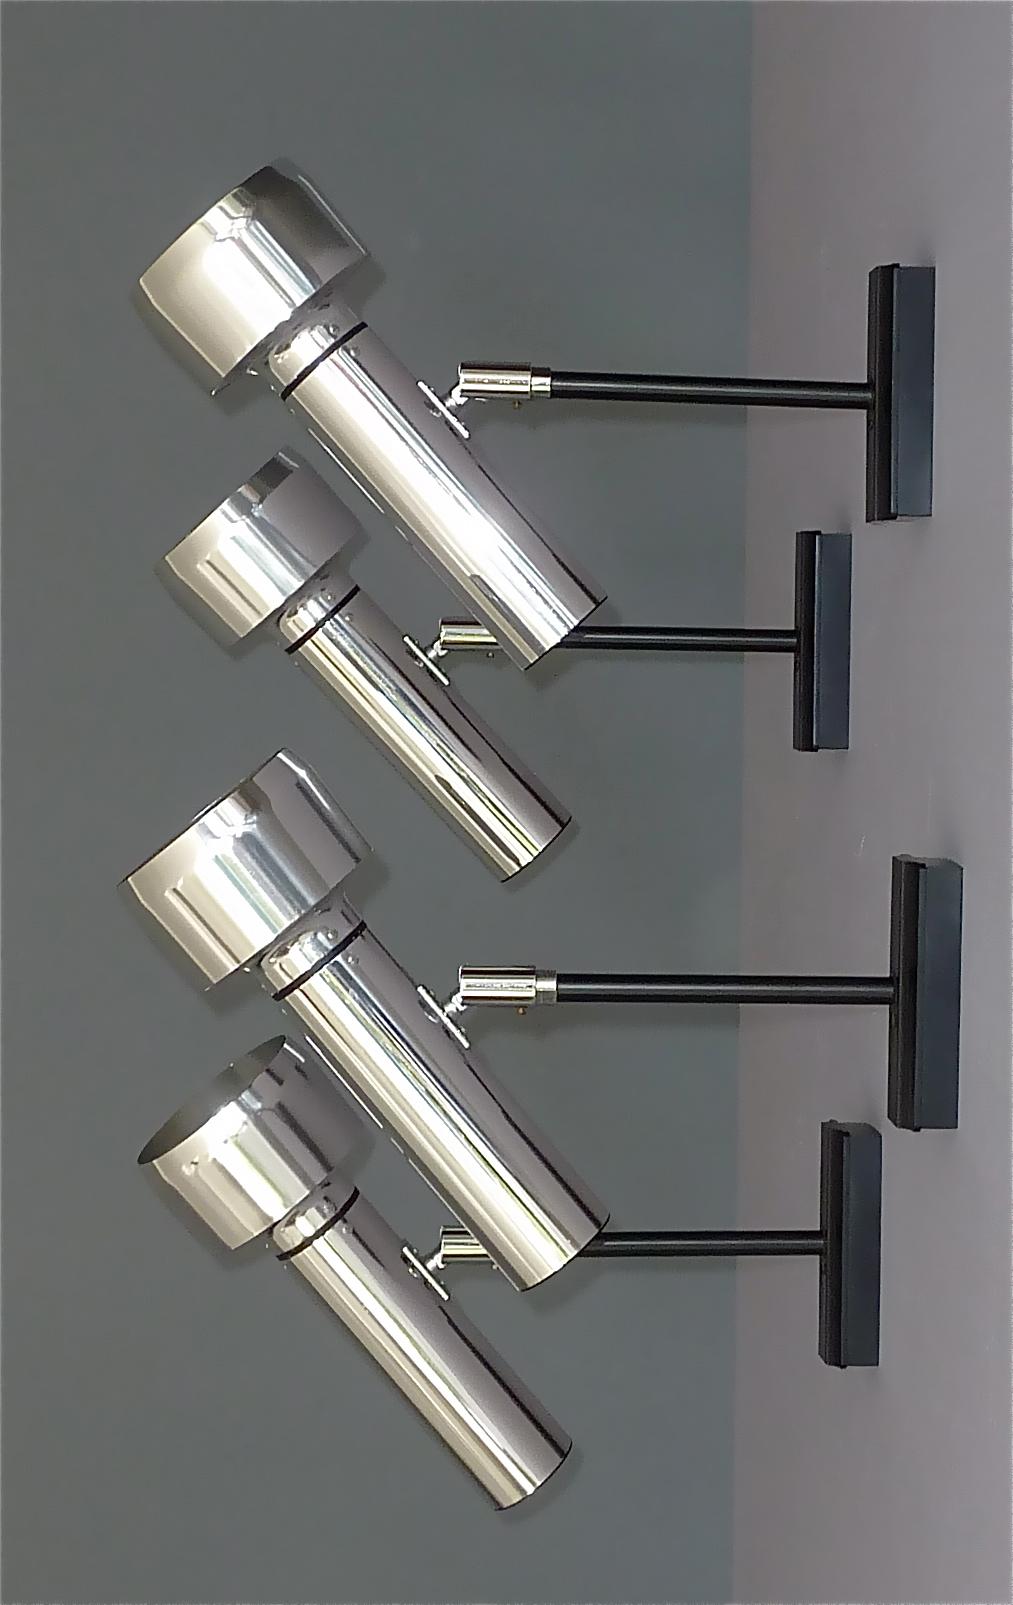 Enameled 4 Wall Lights Erco Spots Ceiling Lamps Chrome Black Sarfatti Arteluce Style For Sale